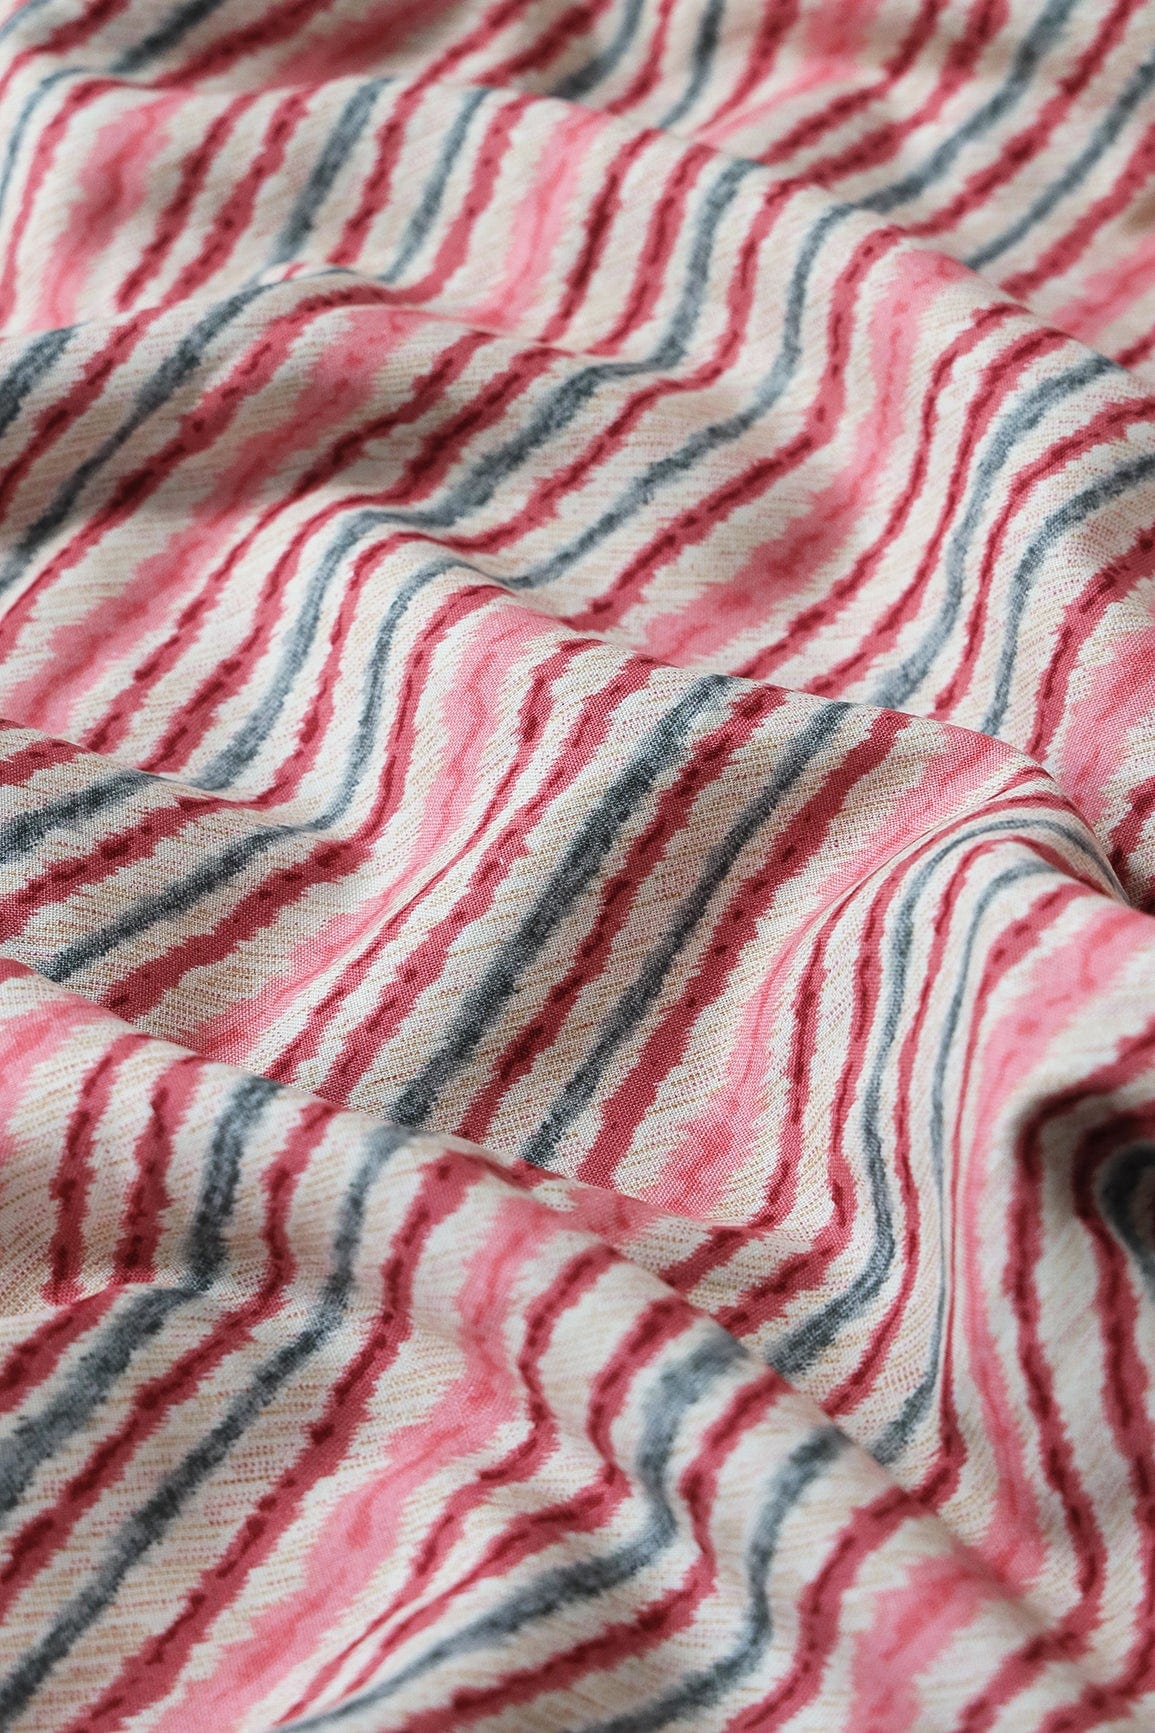 doeraa Prints Pink And Grey Stripes Pattern On Light beige Rayon Fabric